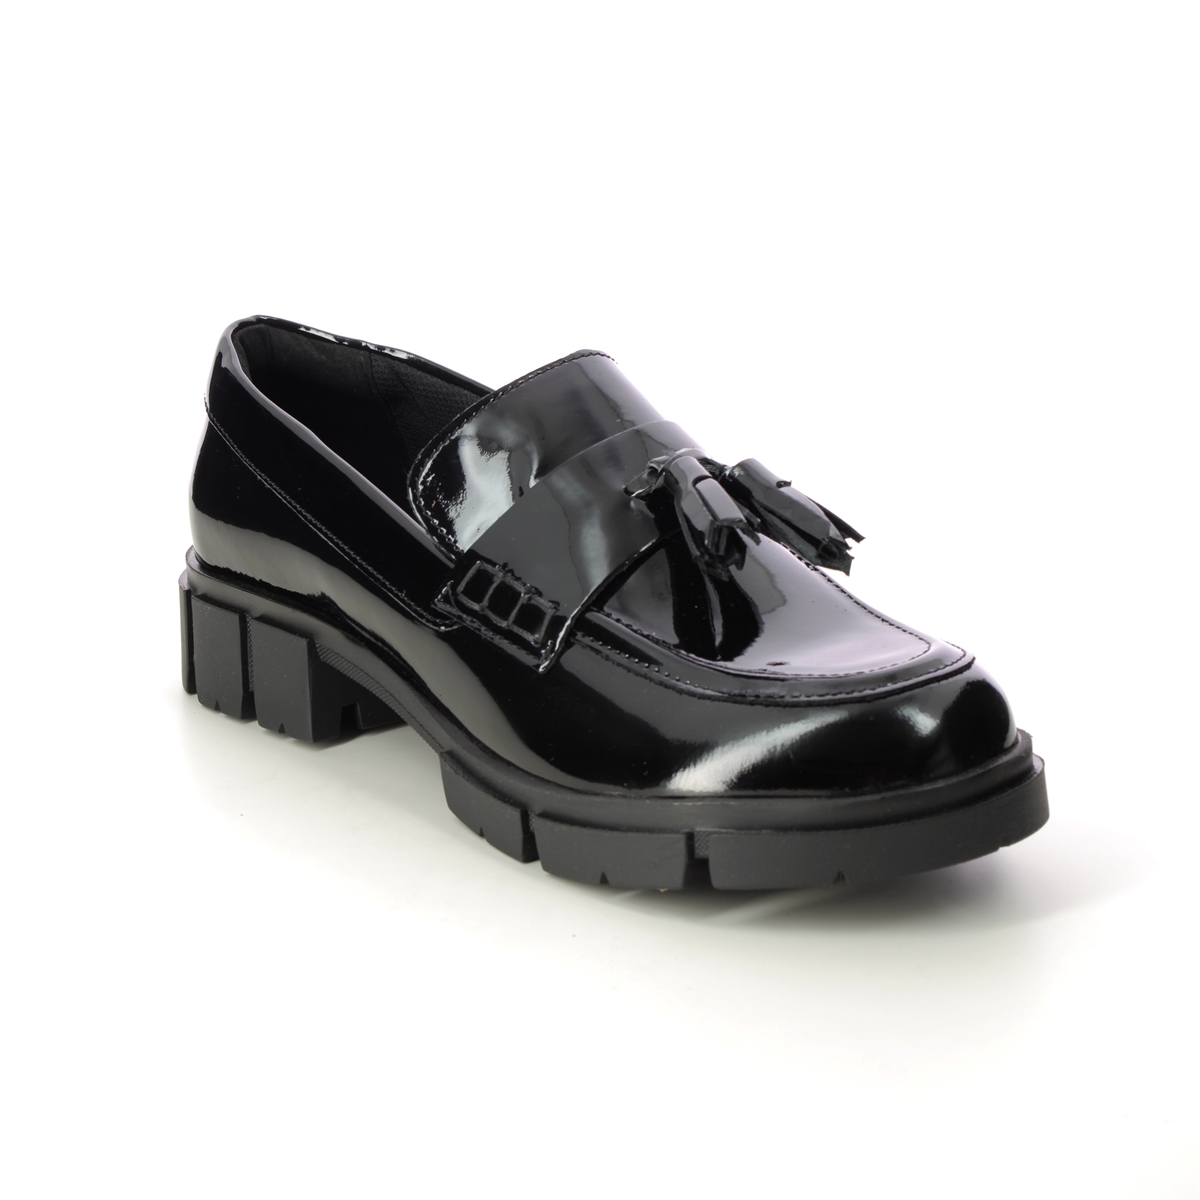 Clarks Teala Loafer Black Patent Womens Loafers 689984D In Size 7 In Plain Black Patent